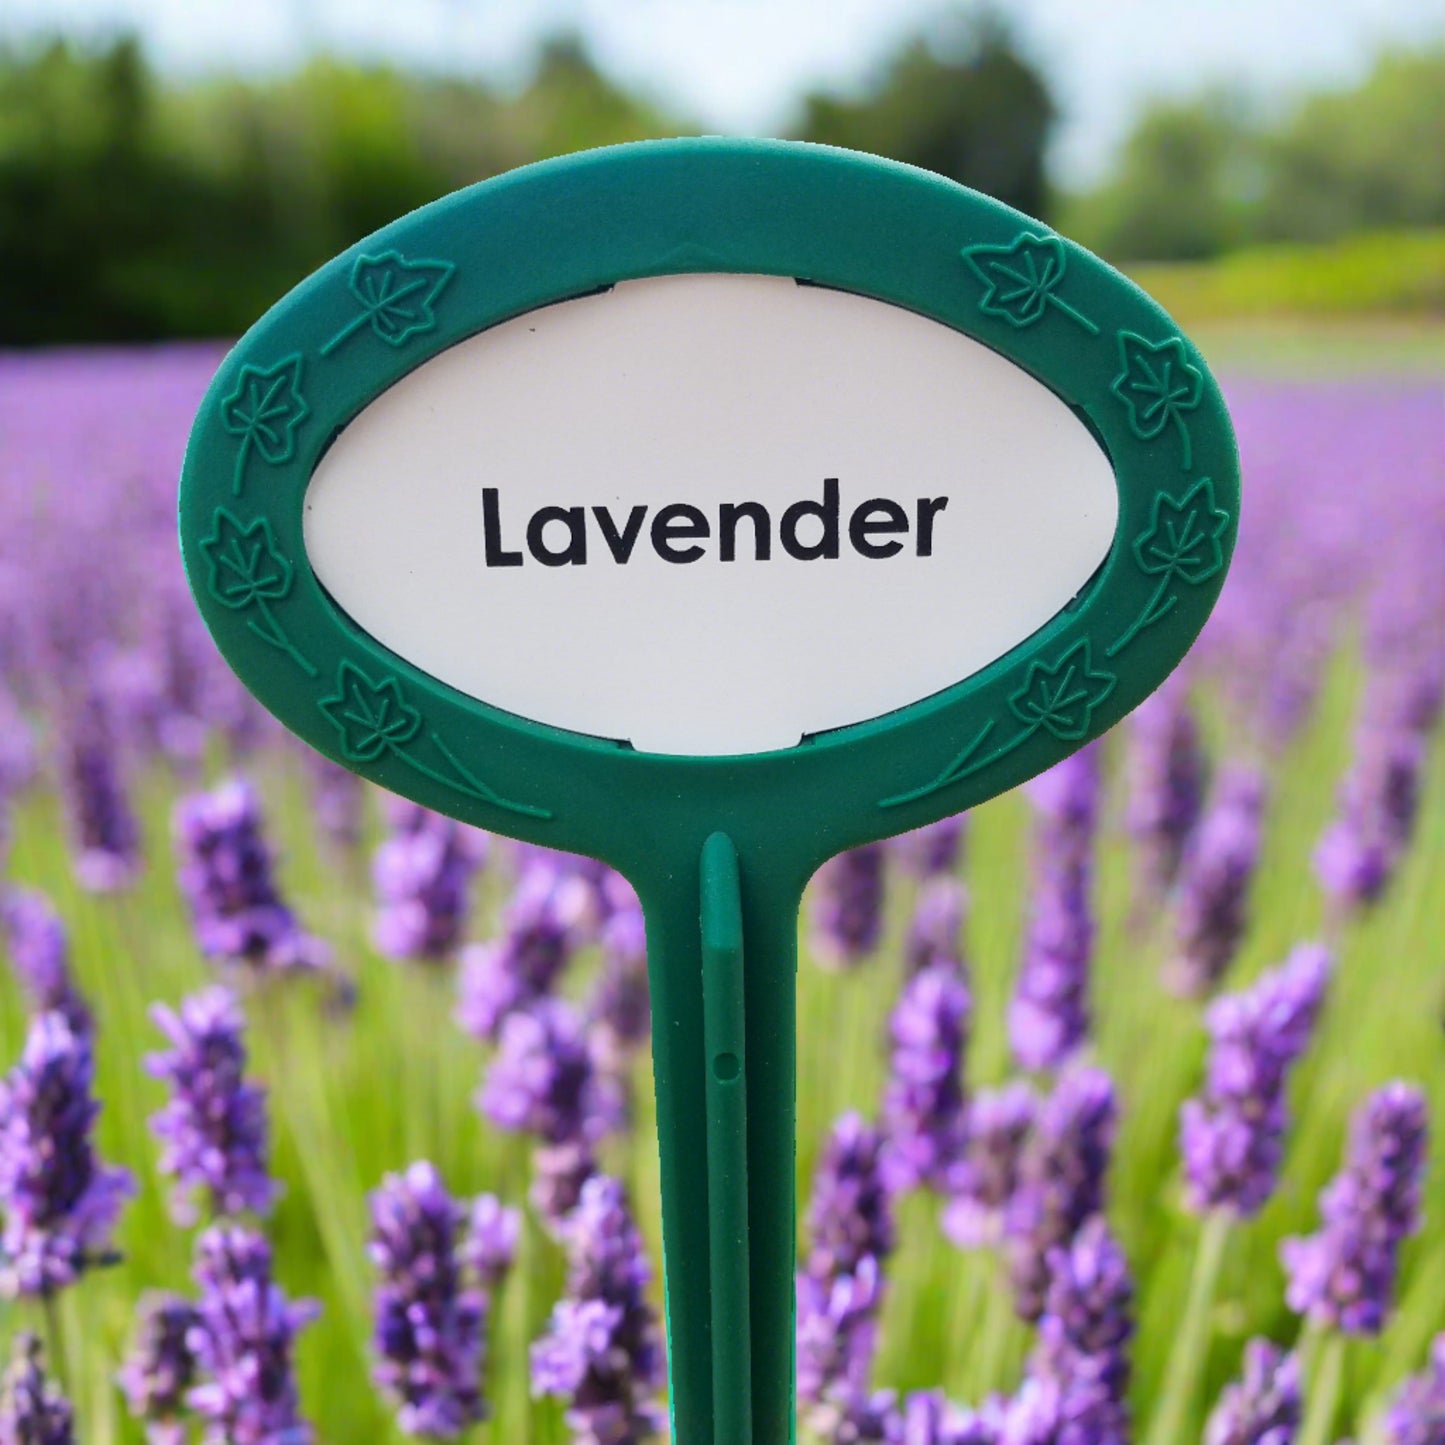 Preprinted garden marker Herb collection 20 pack. long lasting Made in USA. Lavender